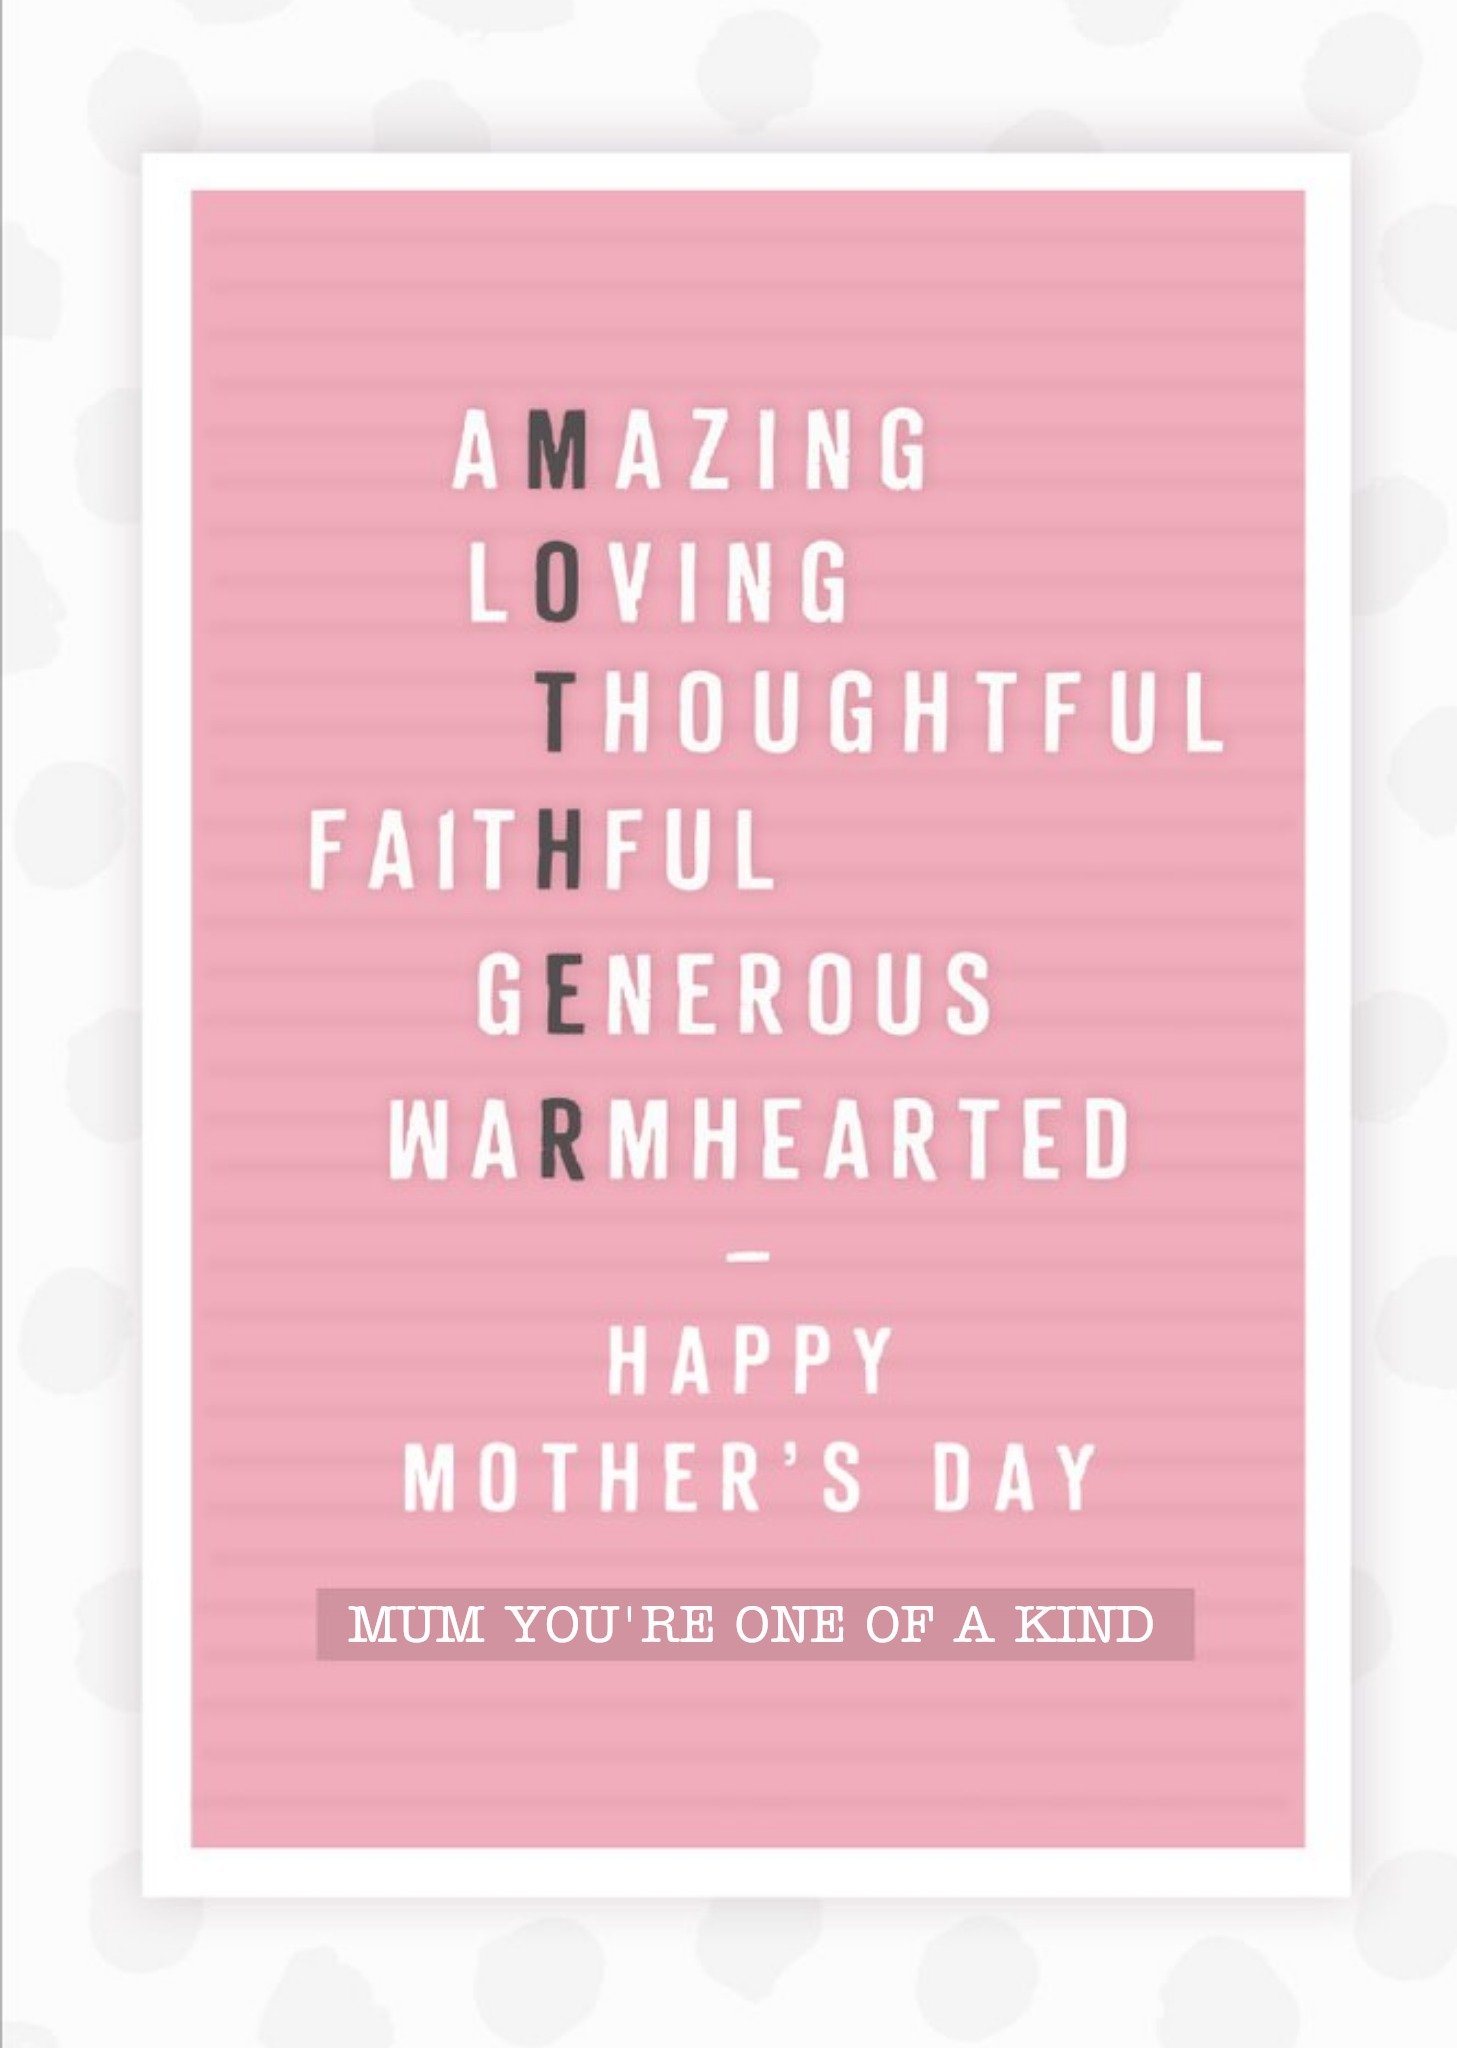 Moonpig Amazing Loving Thoughtful Faithful Generous Warm Hearted Mother Pin Board Sentimental Mother